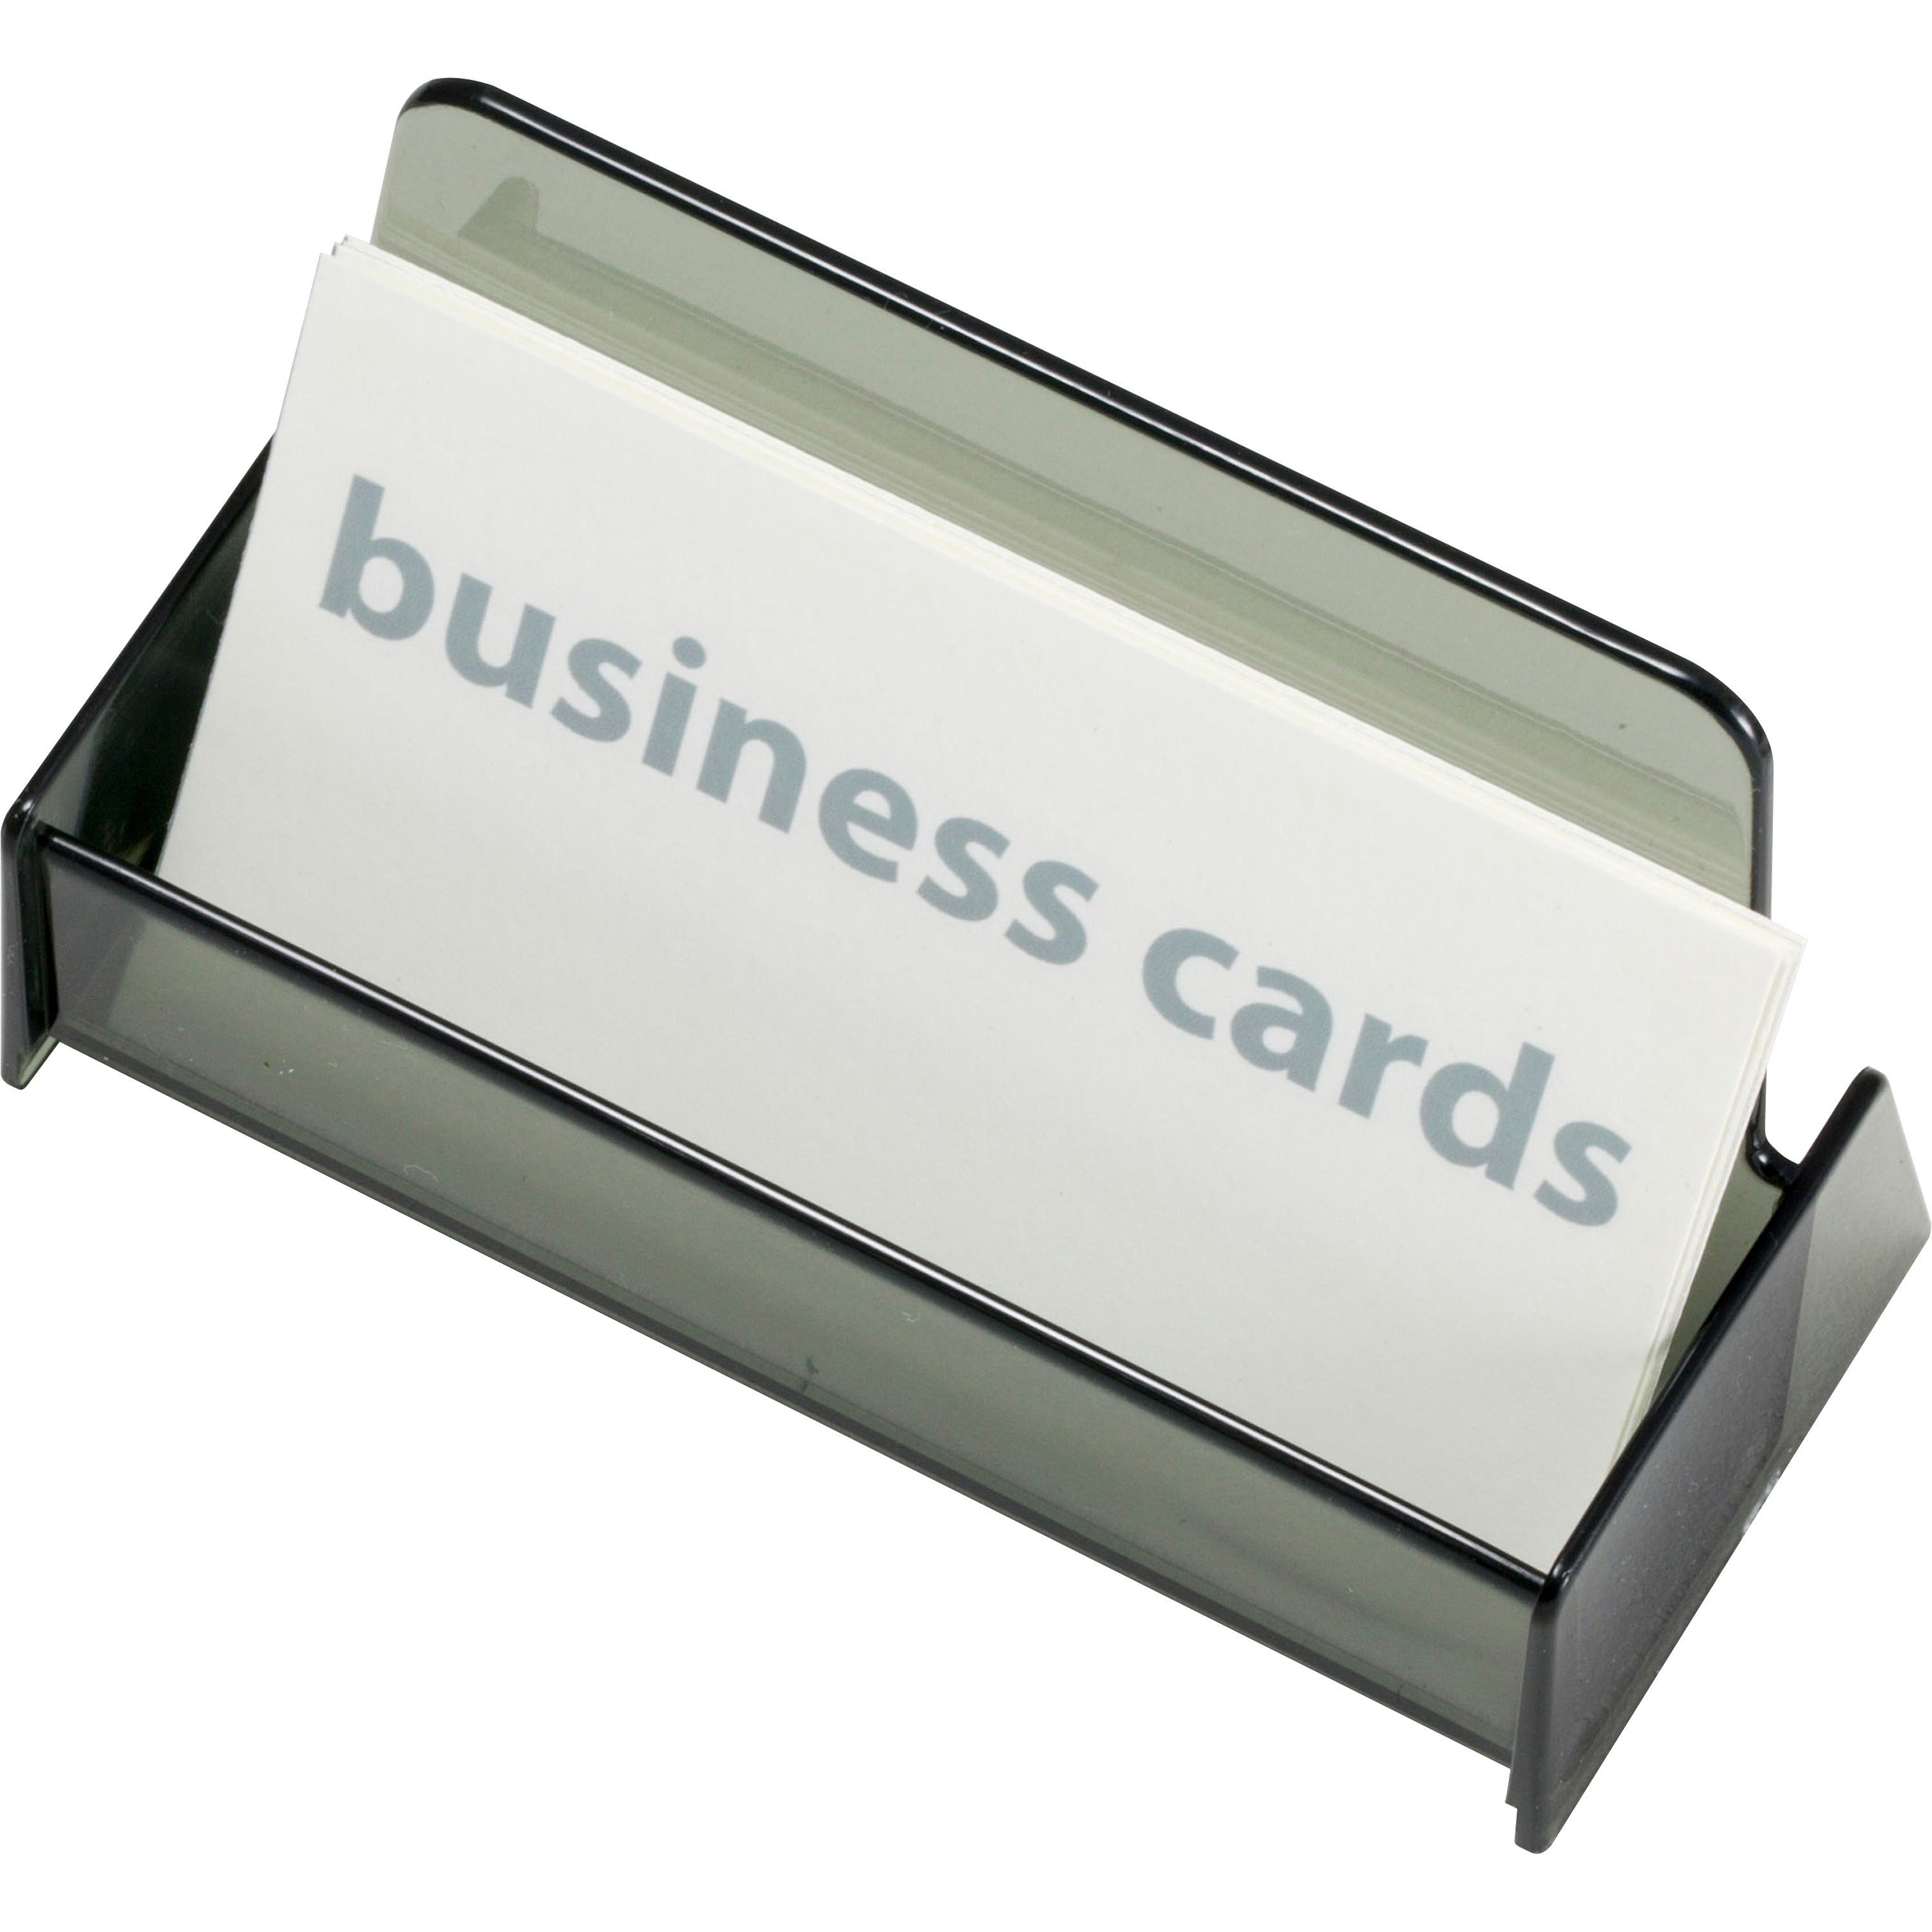 Officemate Business Card Holders - 1.9" x 3.9" x 2.4" x - Plastic - 1 Each - Smoke - 